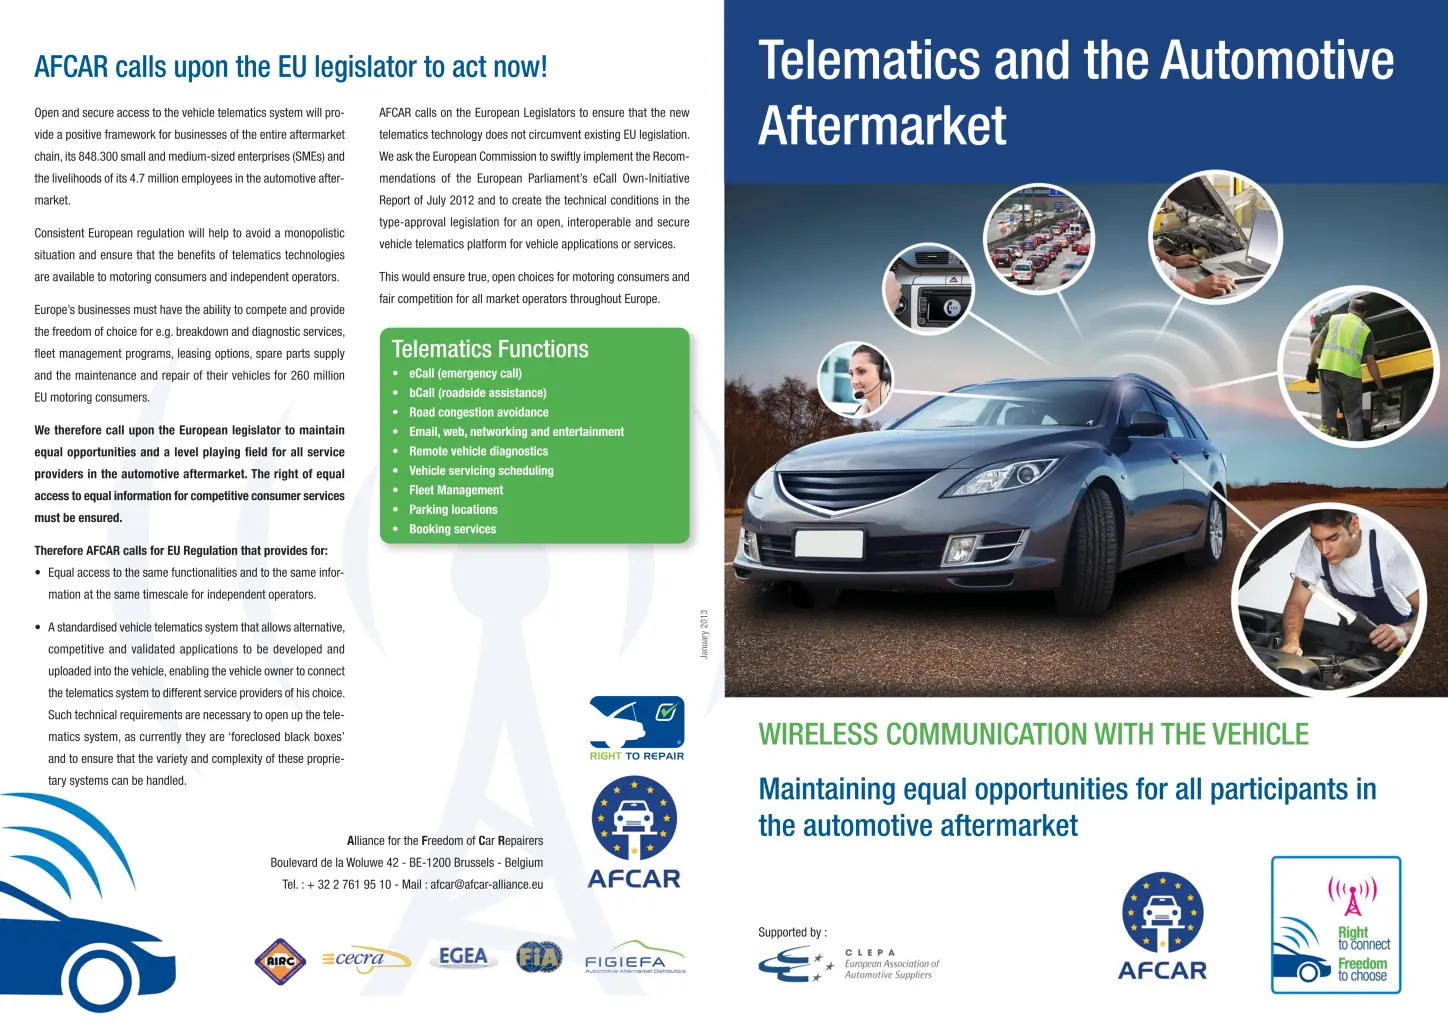 elematics and the Automotive Aftermarket